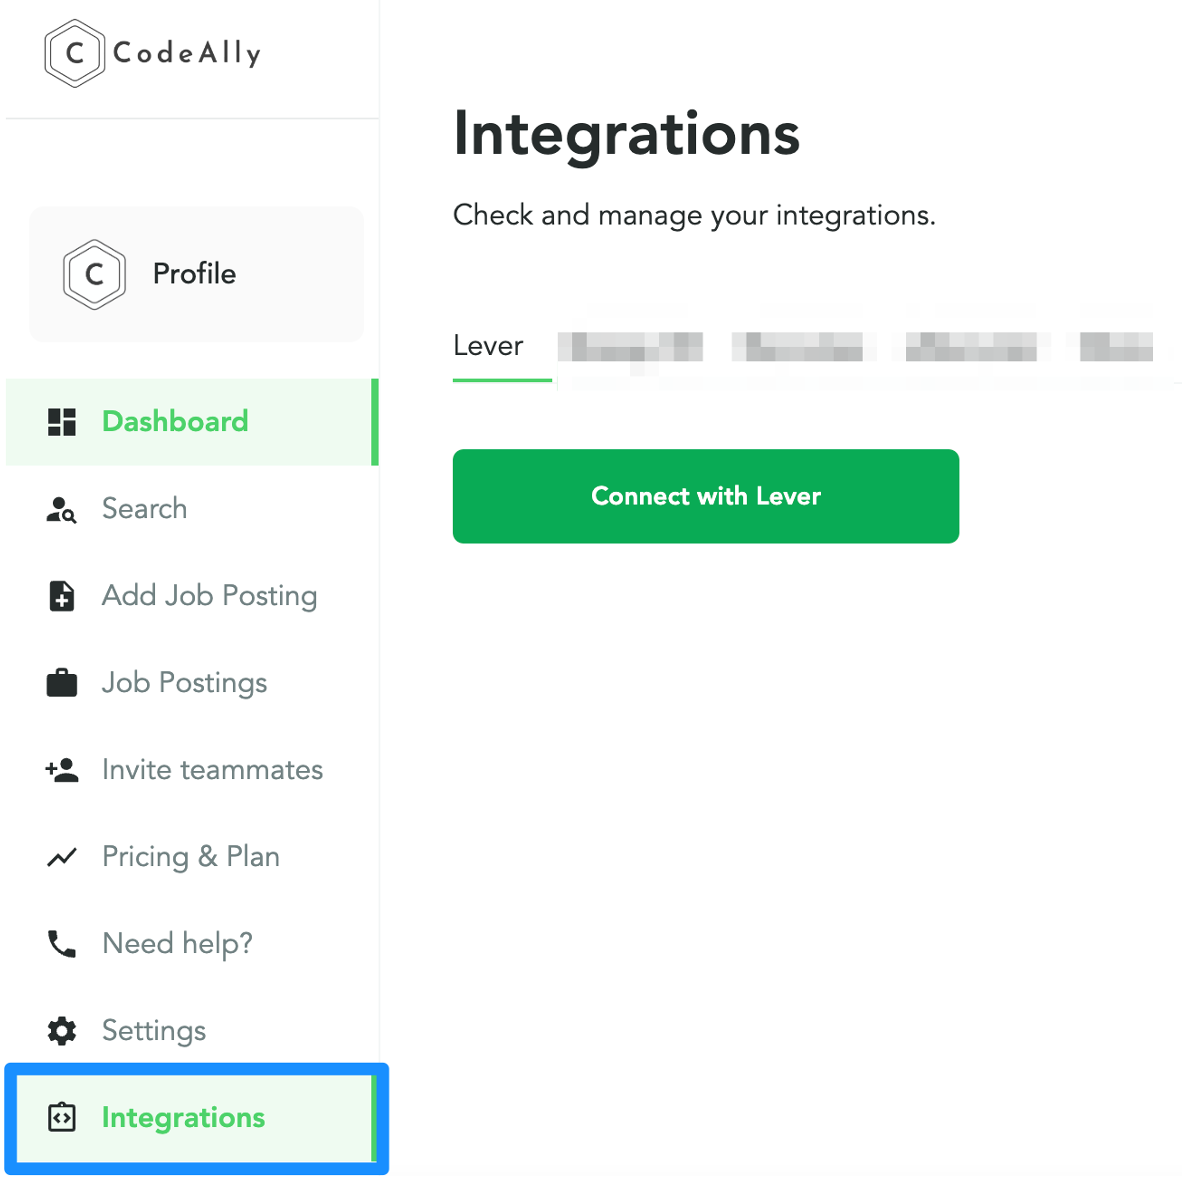 Integrations page in CodeAlly